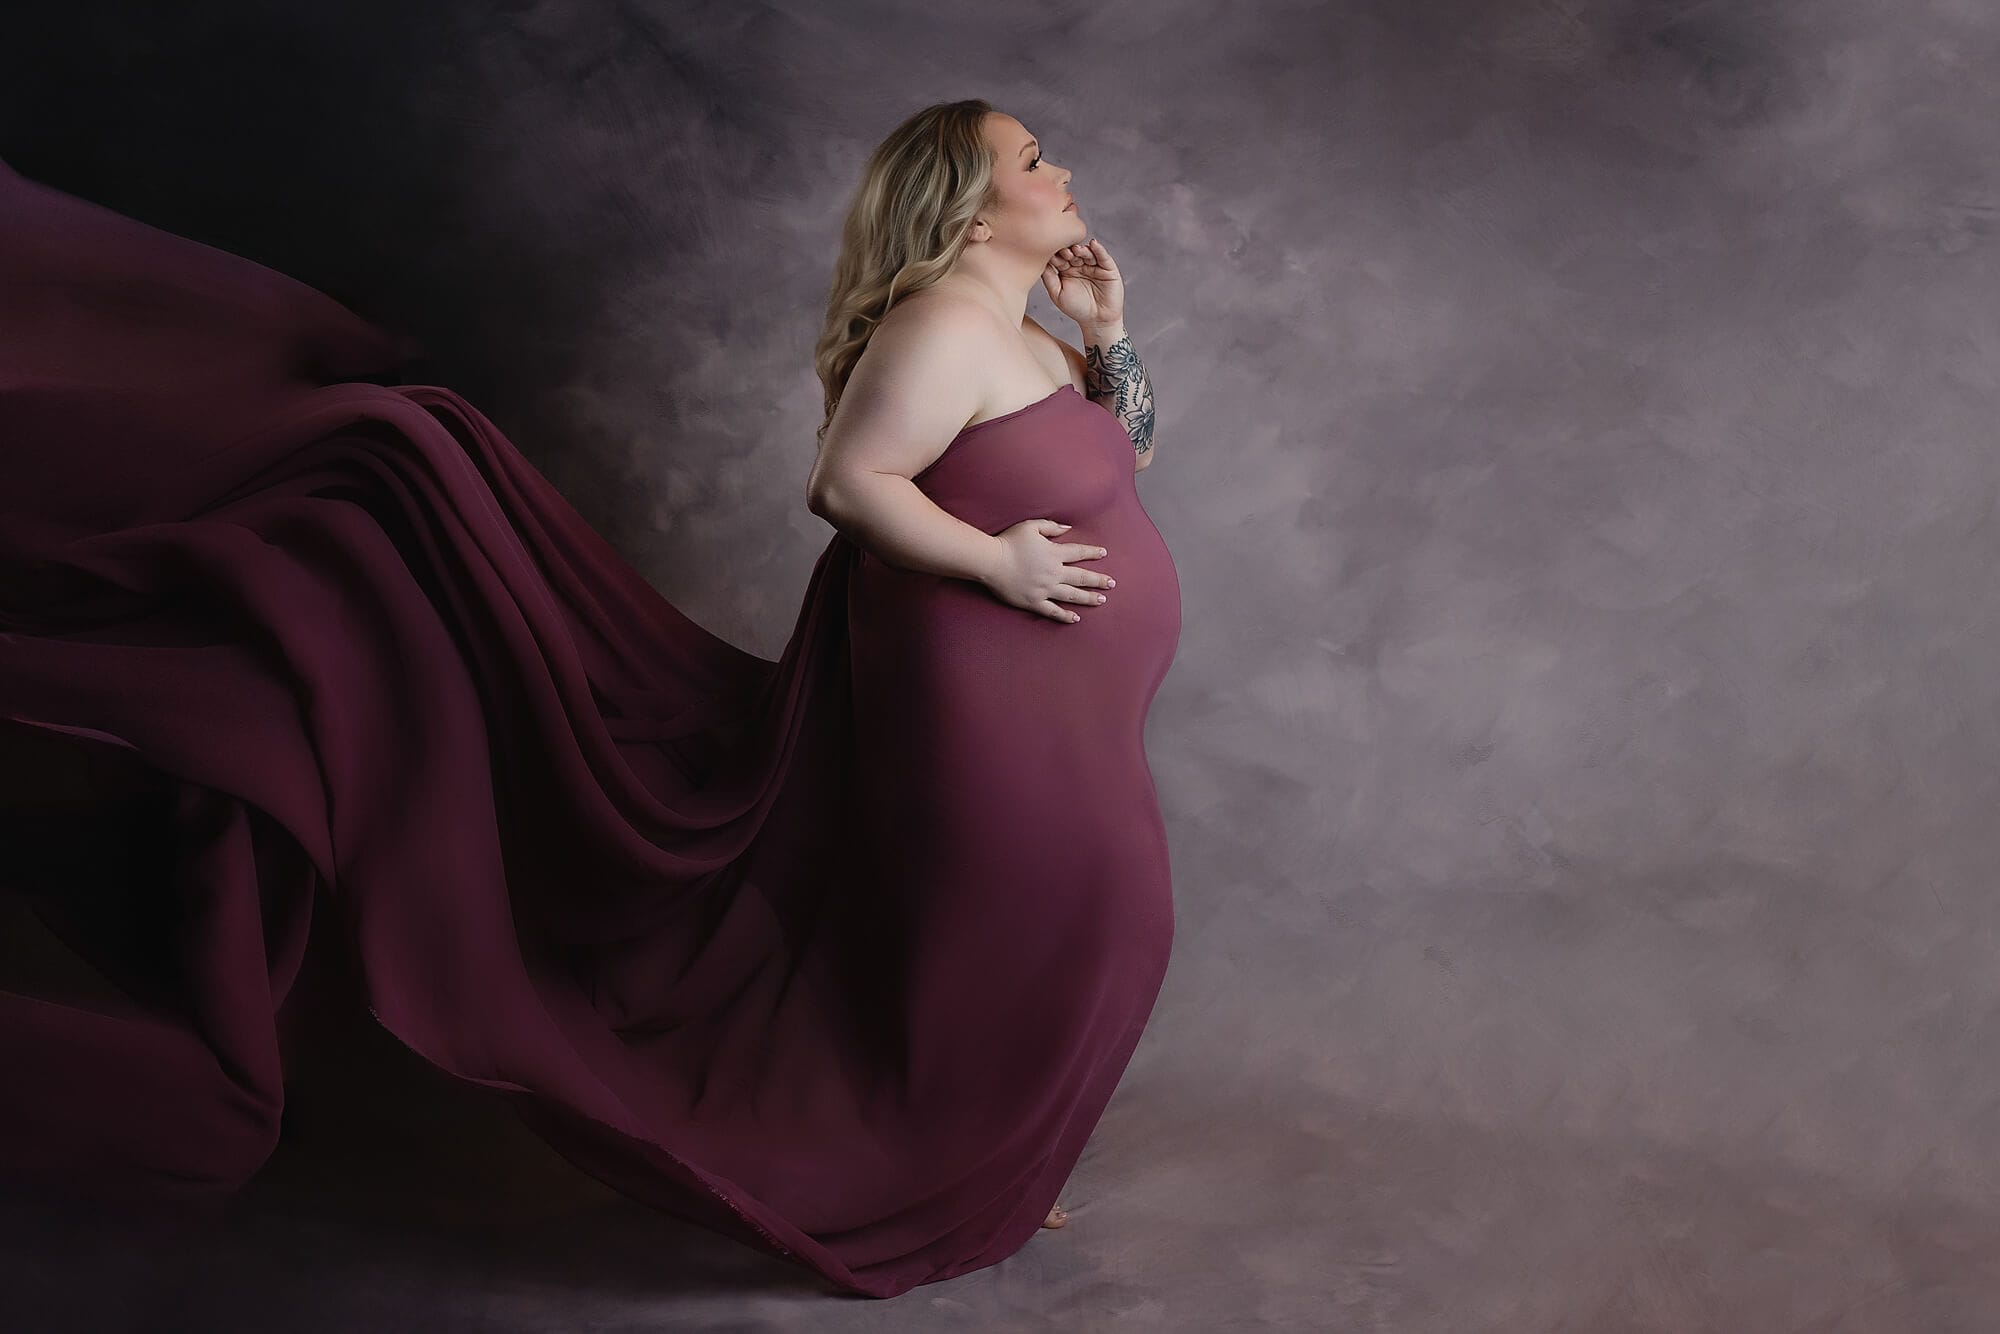 A soon to be mom in the studio with purple fabric draped over her pregnant body.